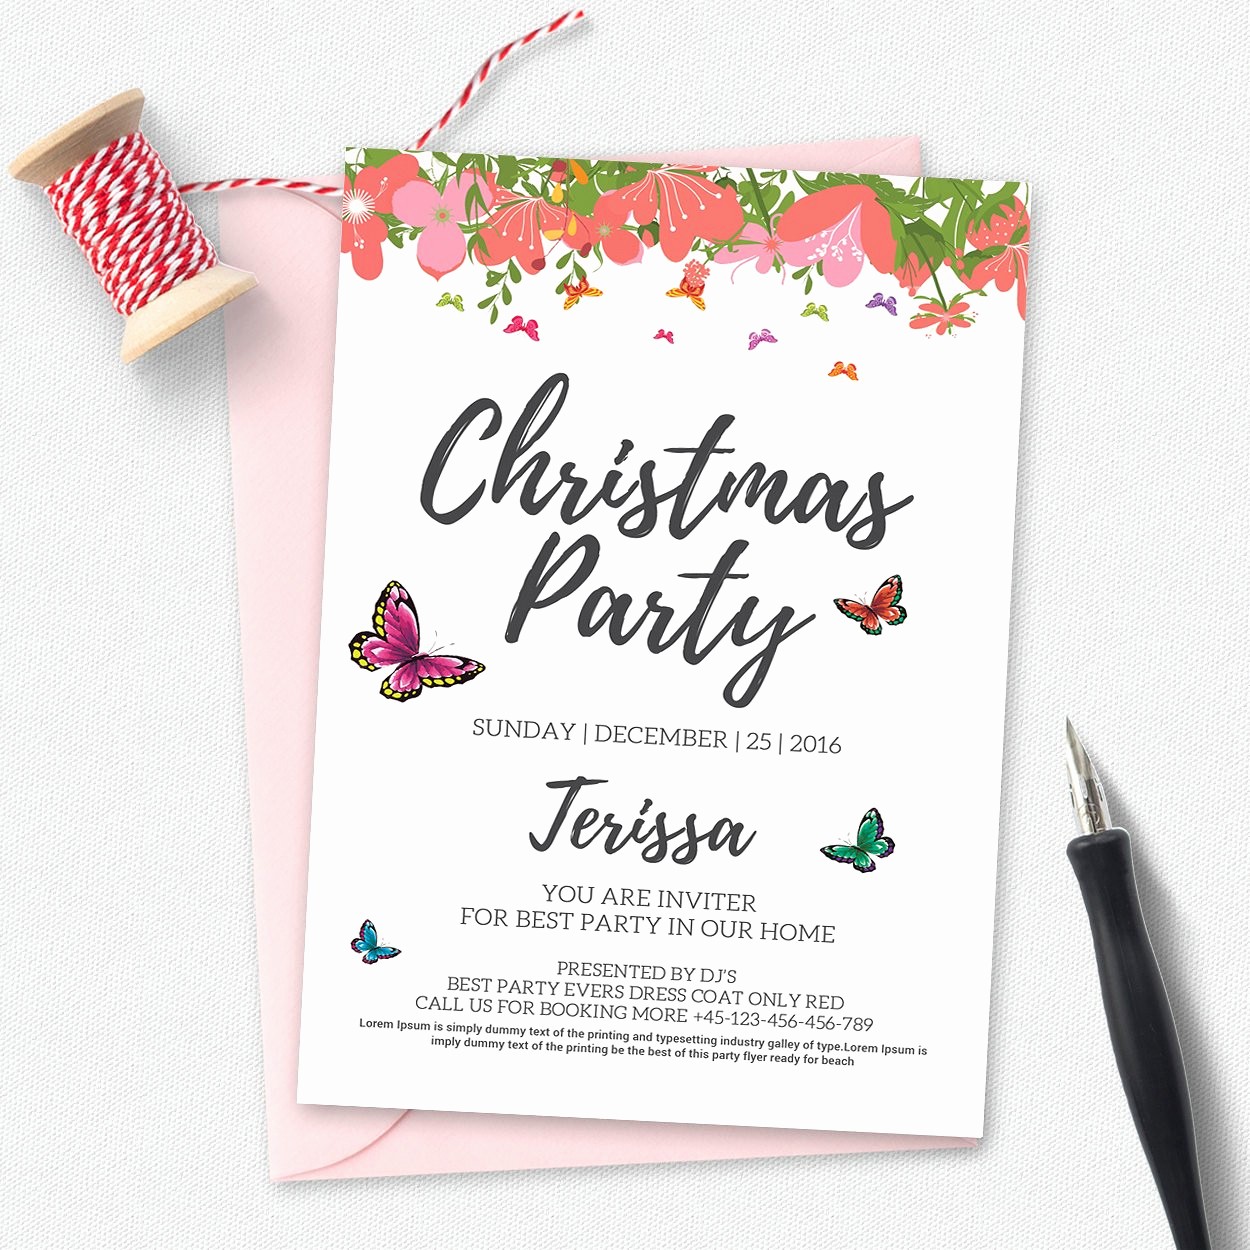 Christmas Party Invitation Free Template Inspirational Christmas Party Invitation Template Invitation Templates